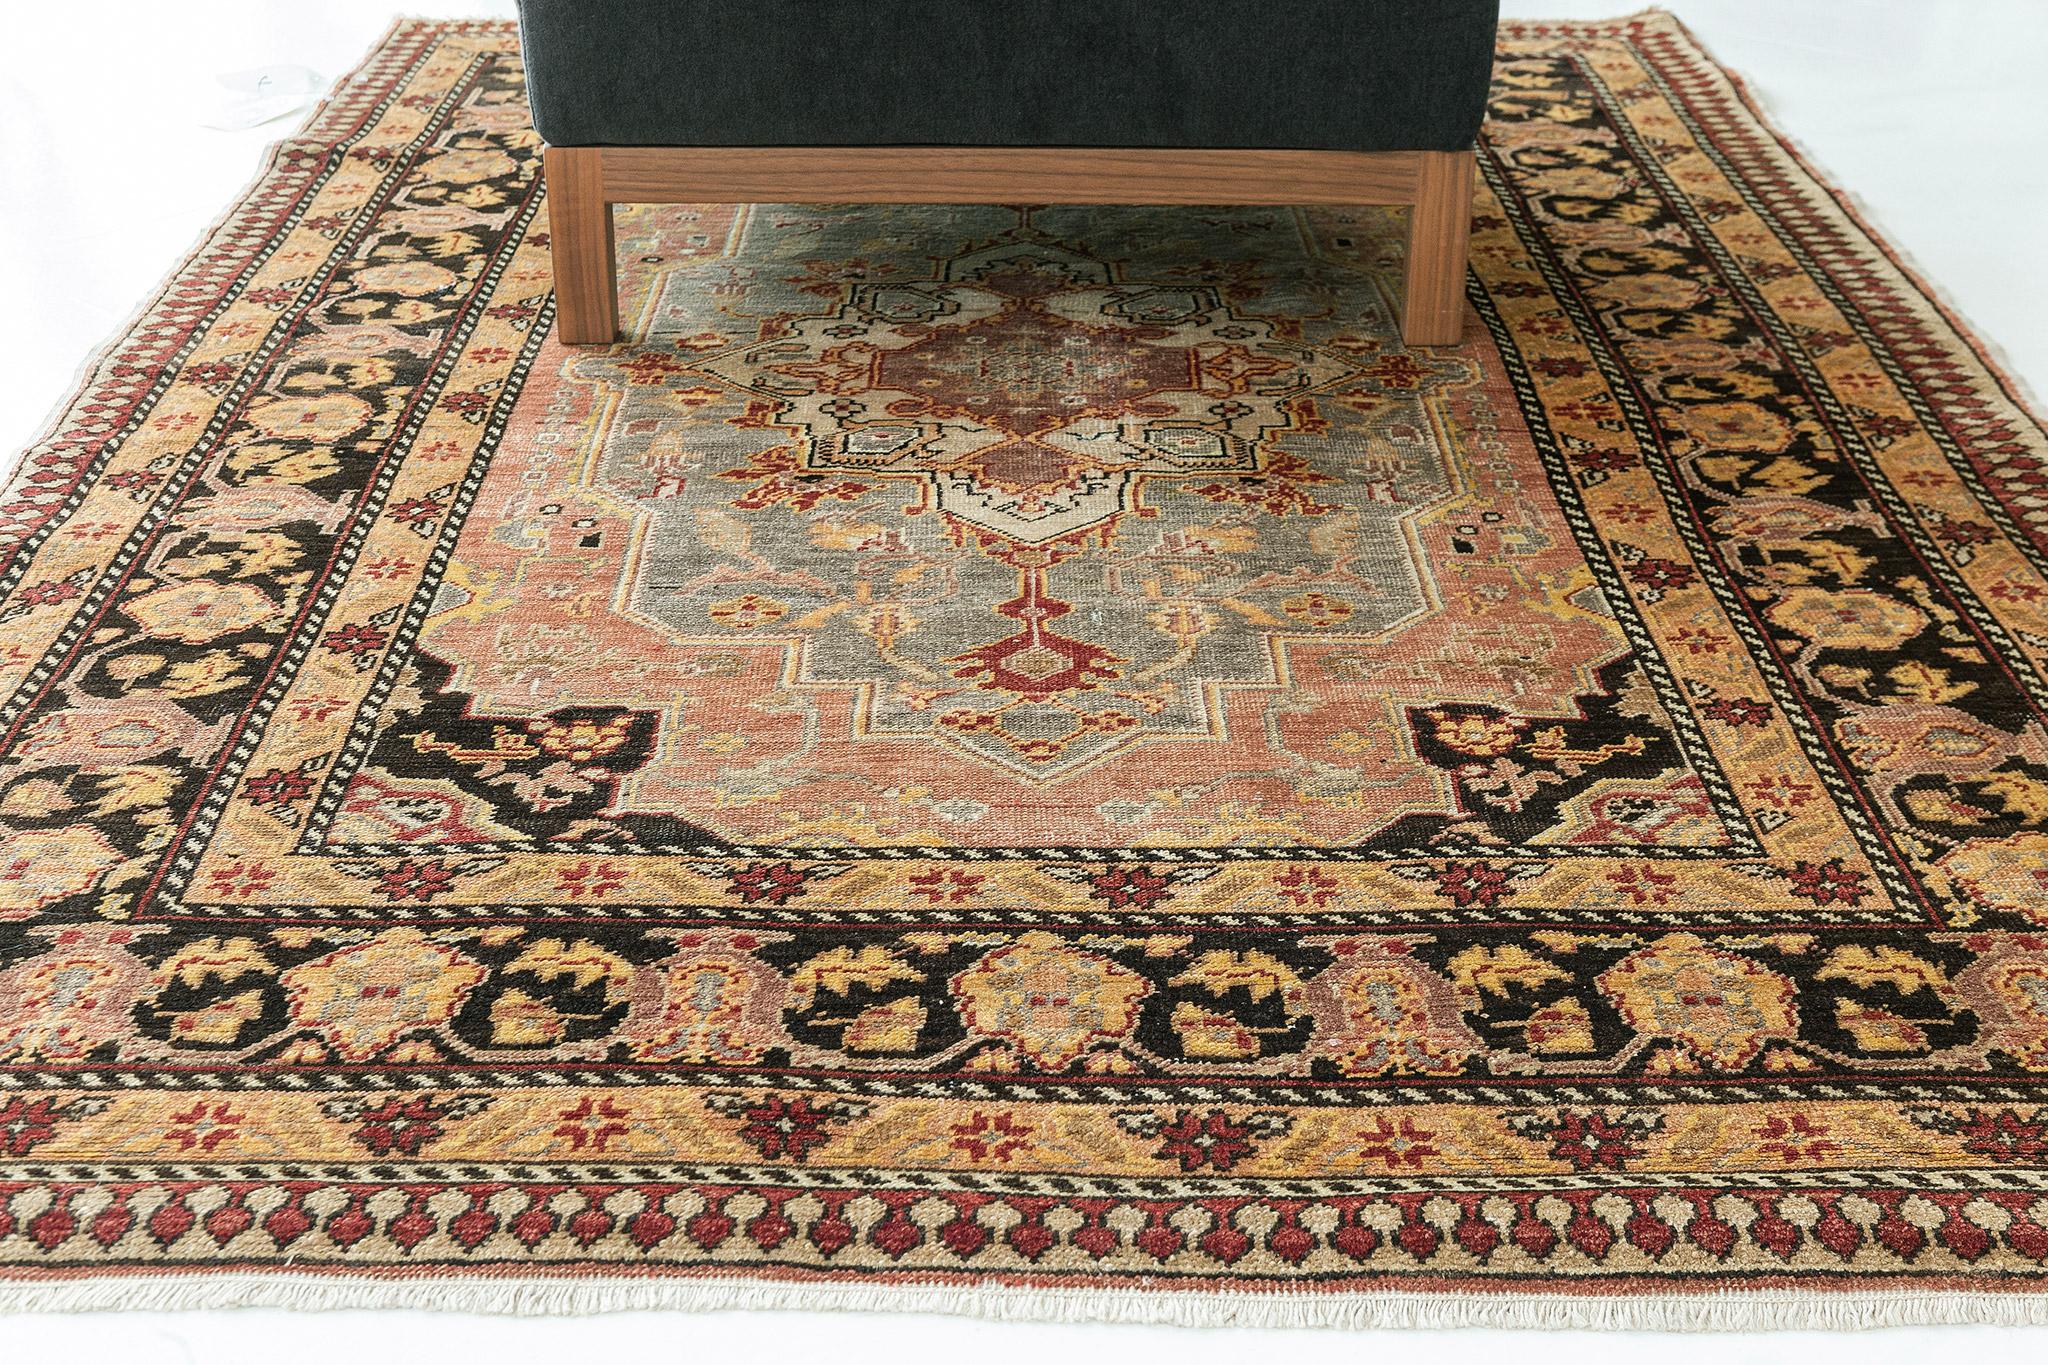 Known as the most genuine in terms of traditional style and motif, this iconic Turkish Anatolian rug features tones of ebony, camel, and terracotta. Meticulously hand-woven details were sophisticated medallions and motifs, repeated all over the